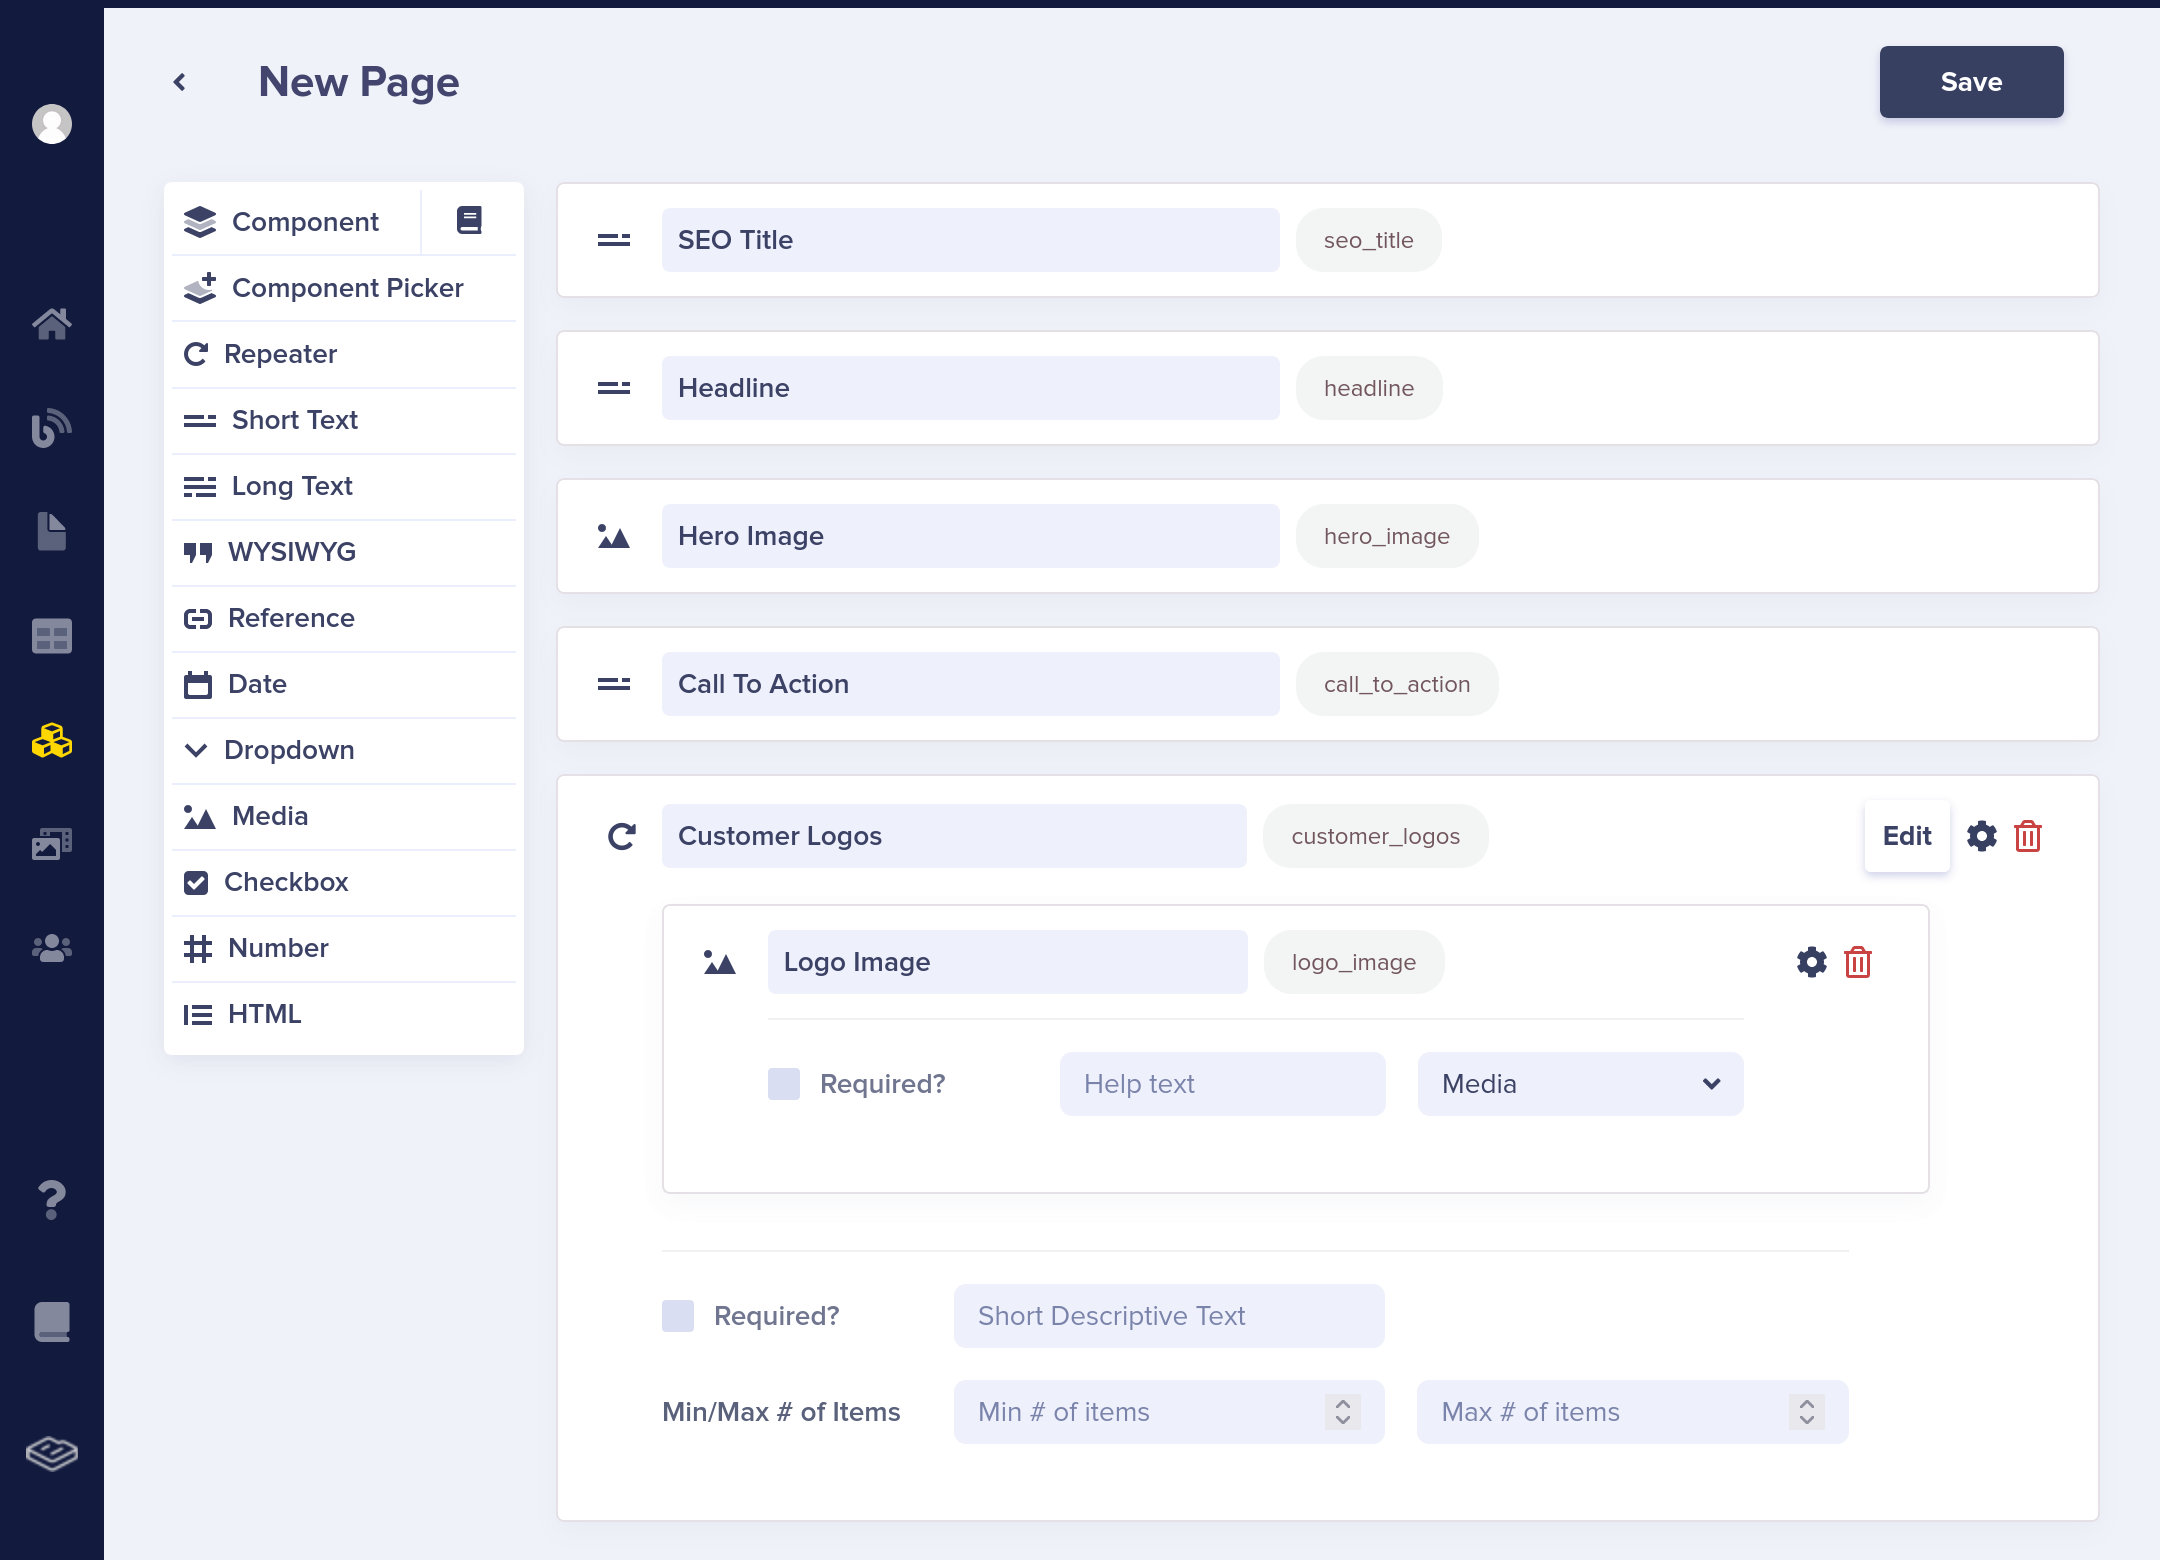 A dashboard for a new Page with some field types defined to give the page structure.